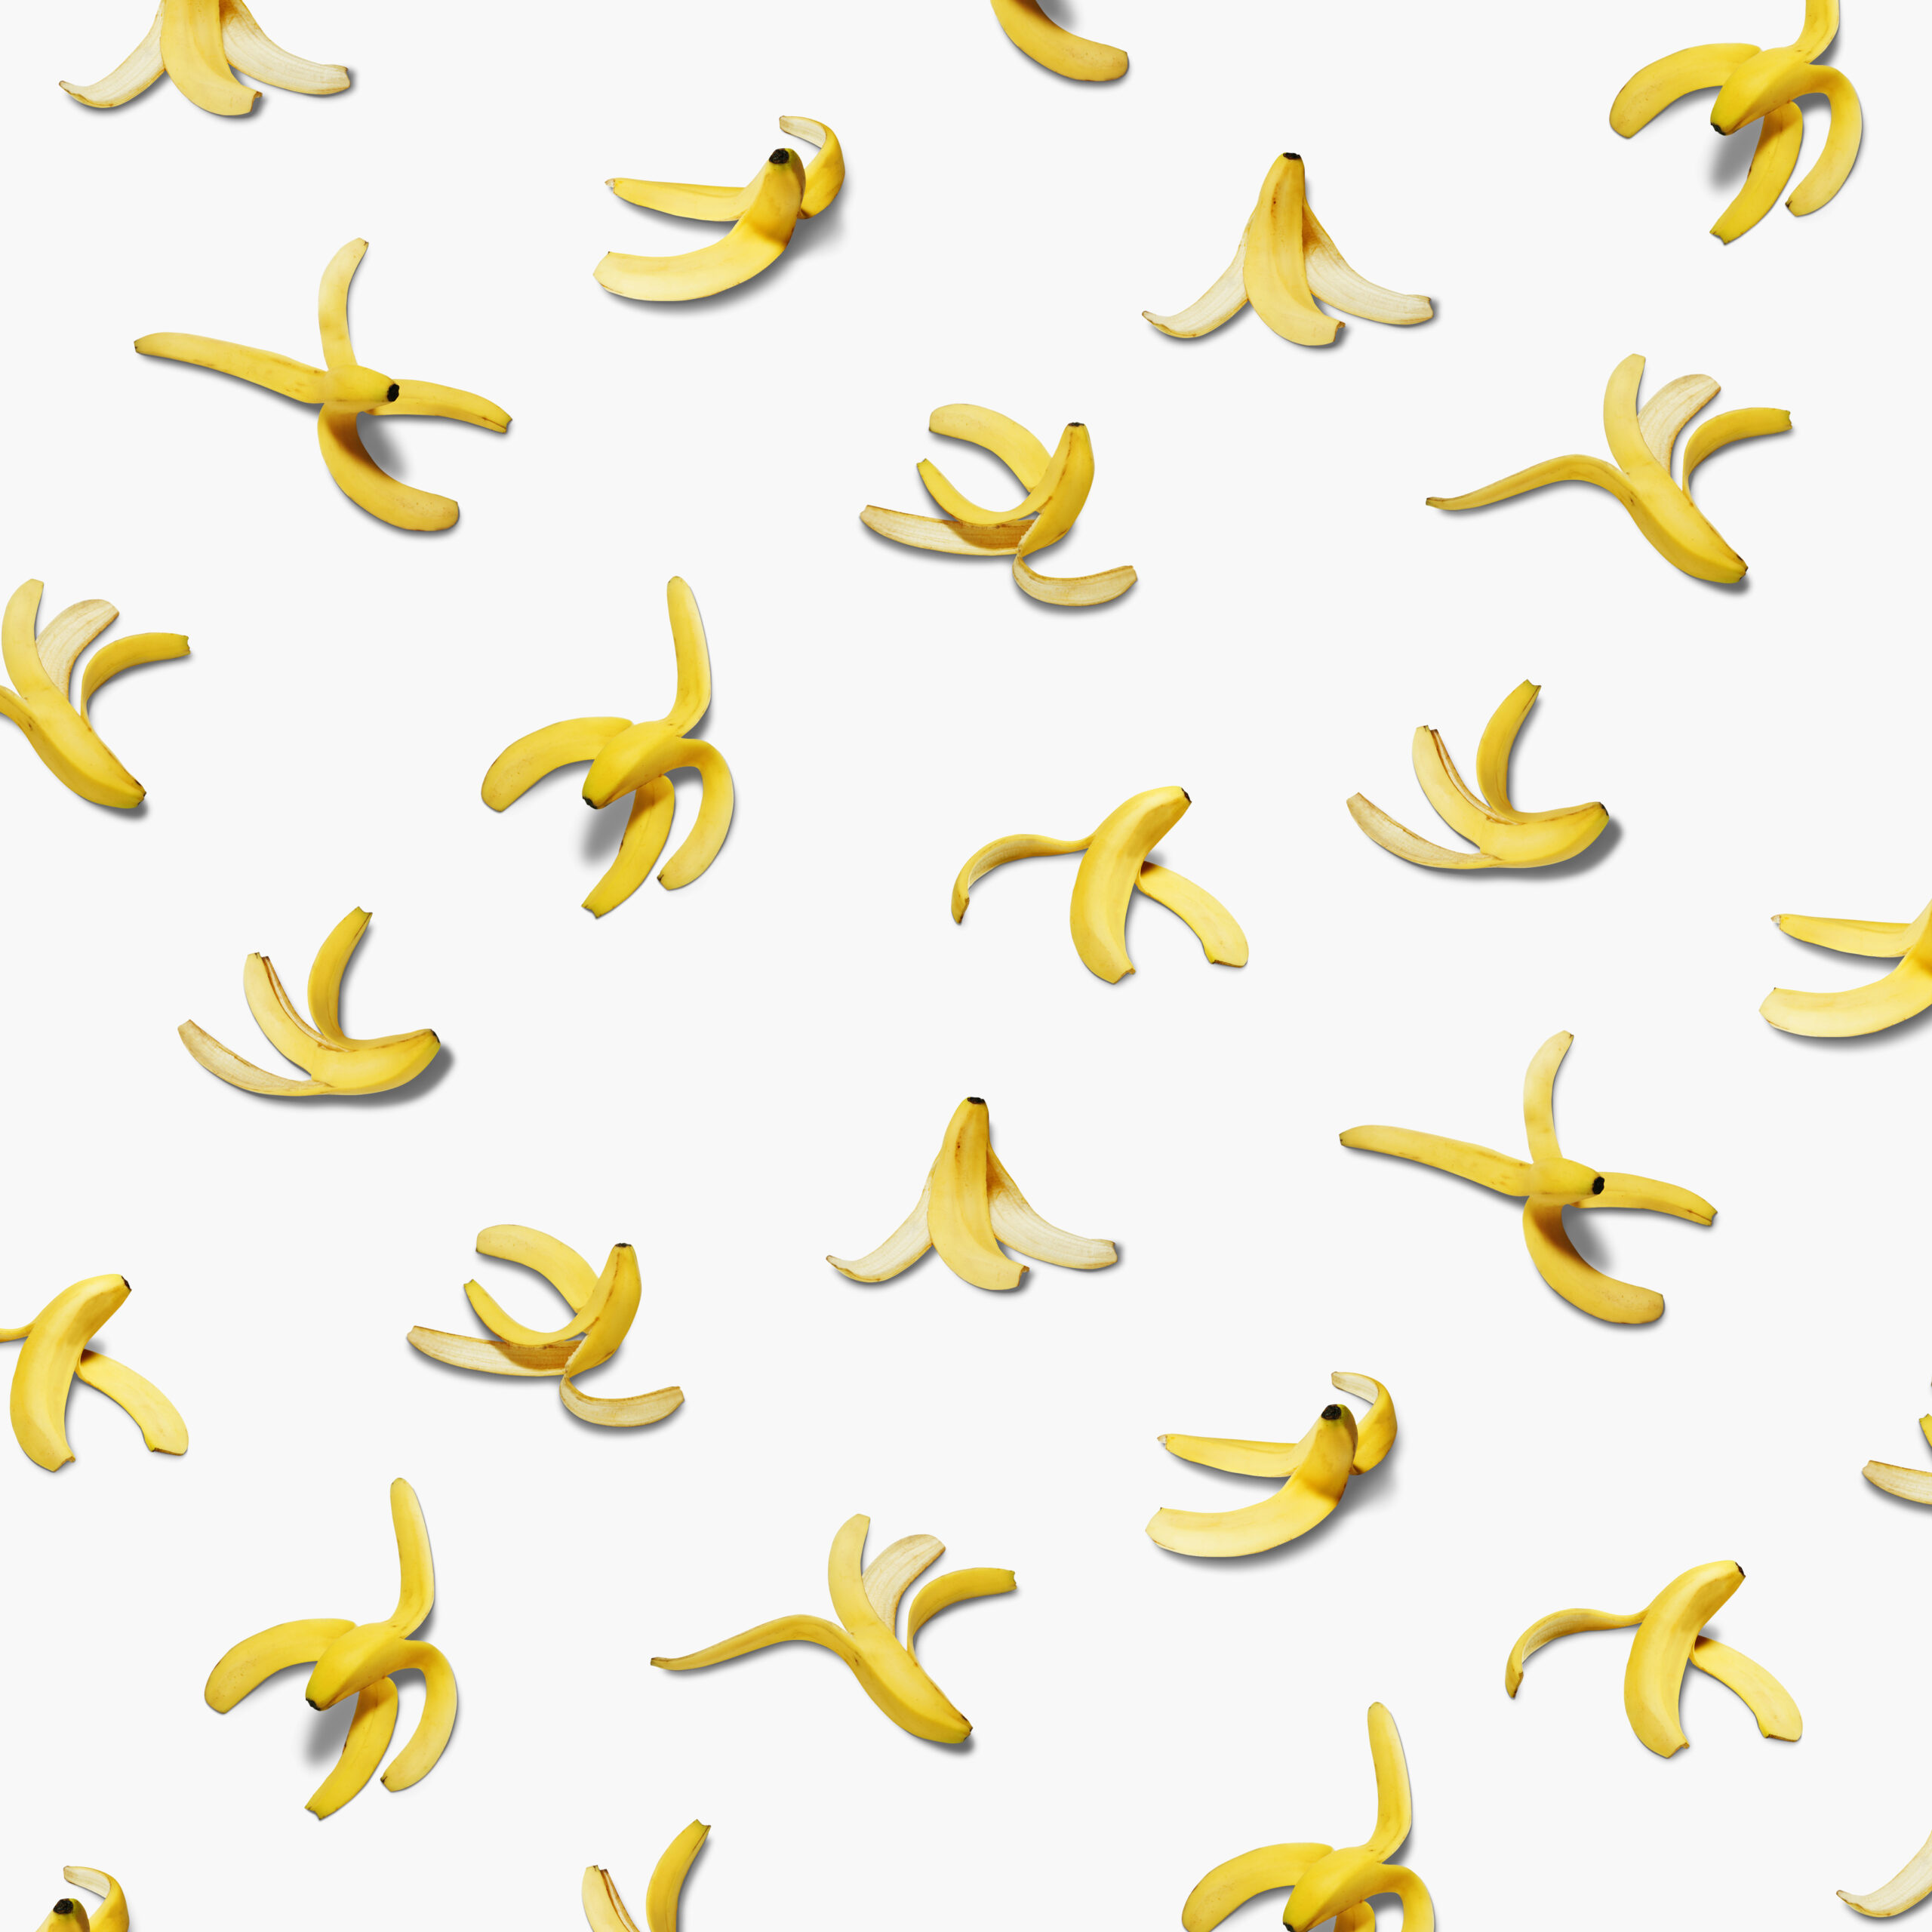 Six things you can do with banana peel